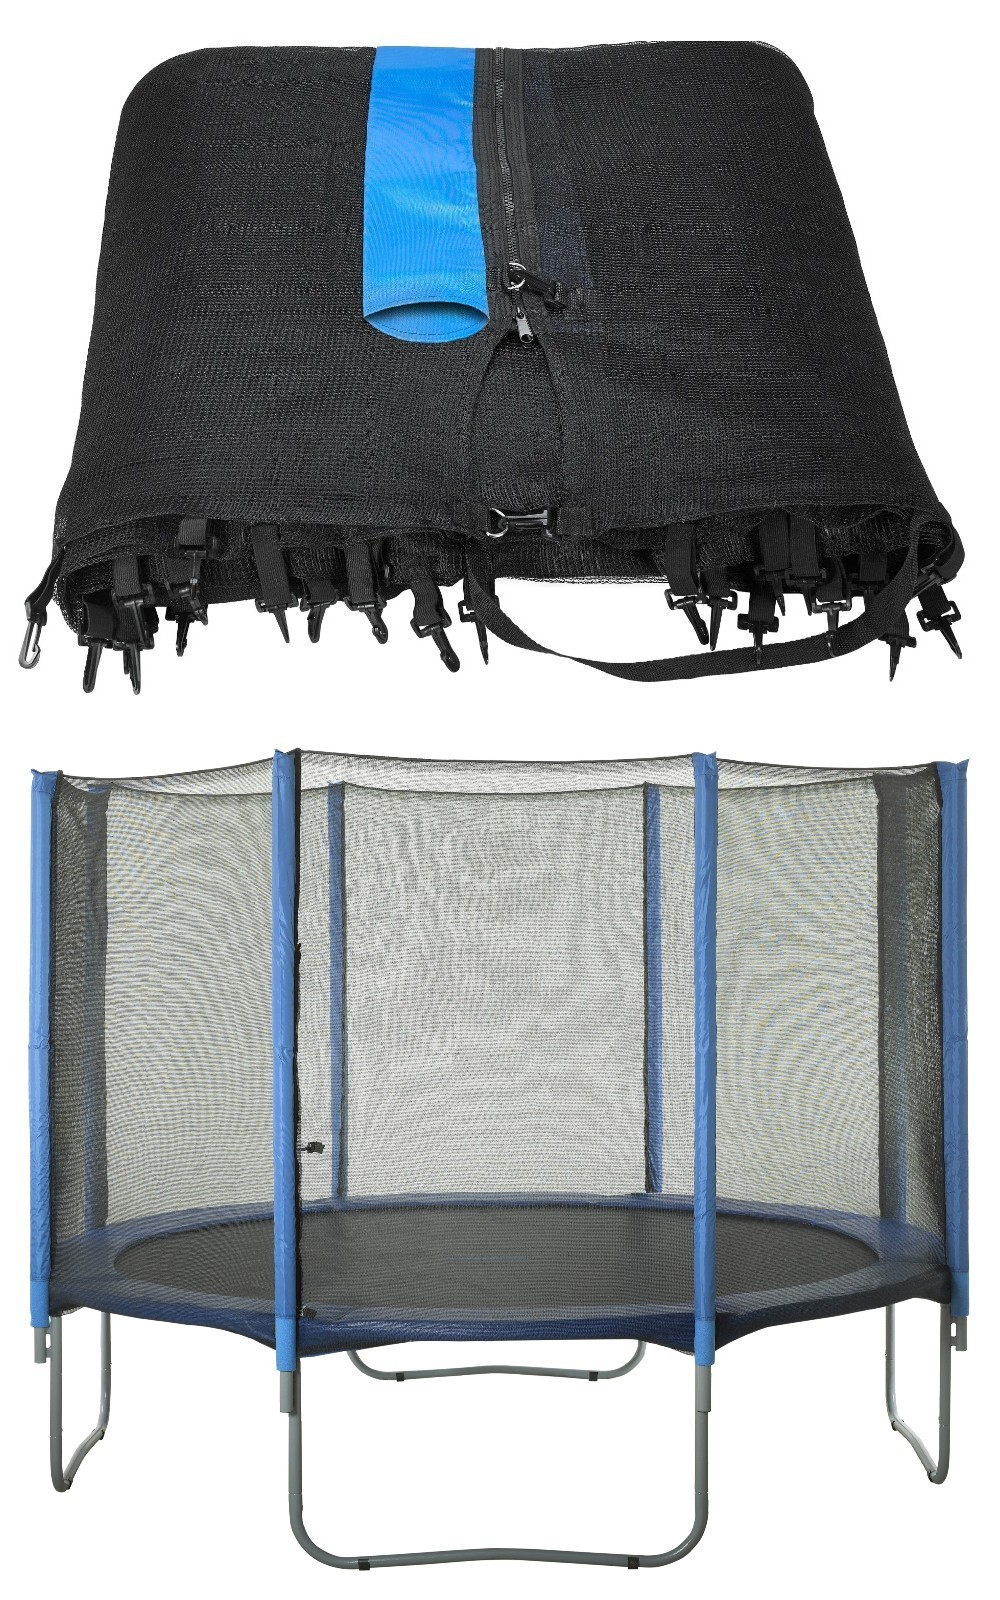 Trampoline Replacement Enclosure Safety Net, fits for 10 FT. Round Frames using 8 Straight Poles - Net Only